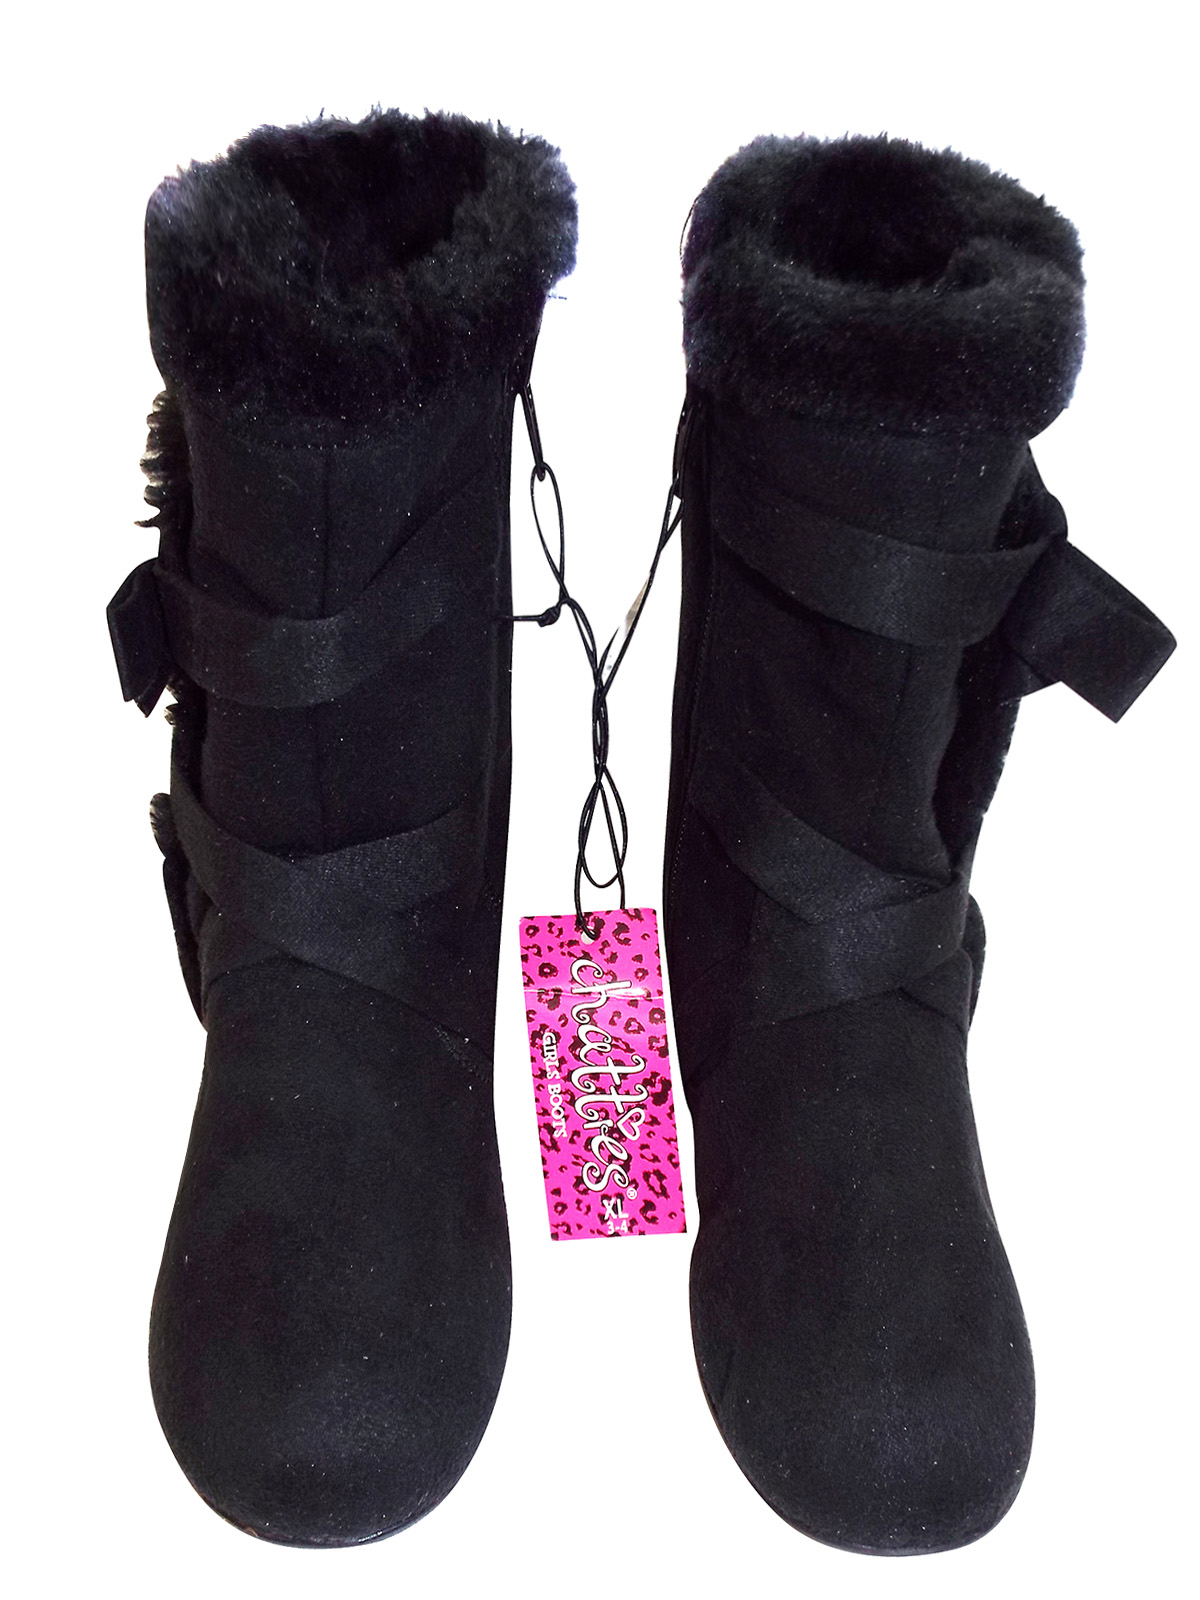 Chatties - - Chatties BLACK Girls Faux Fur Trim Ankle Boots - Size 12/13 to 3/4